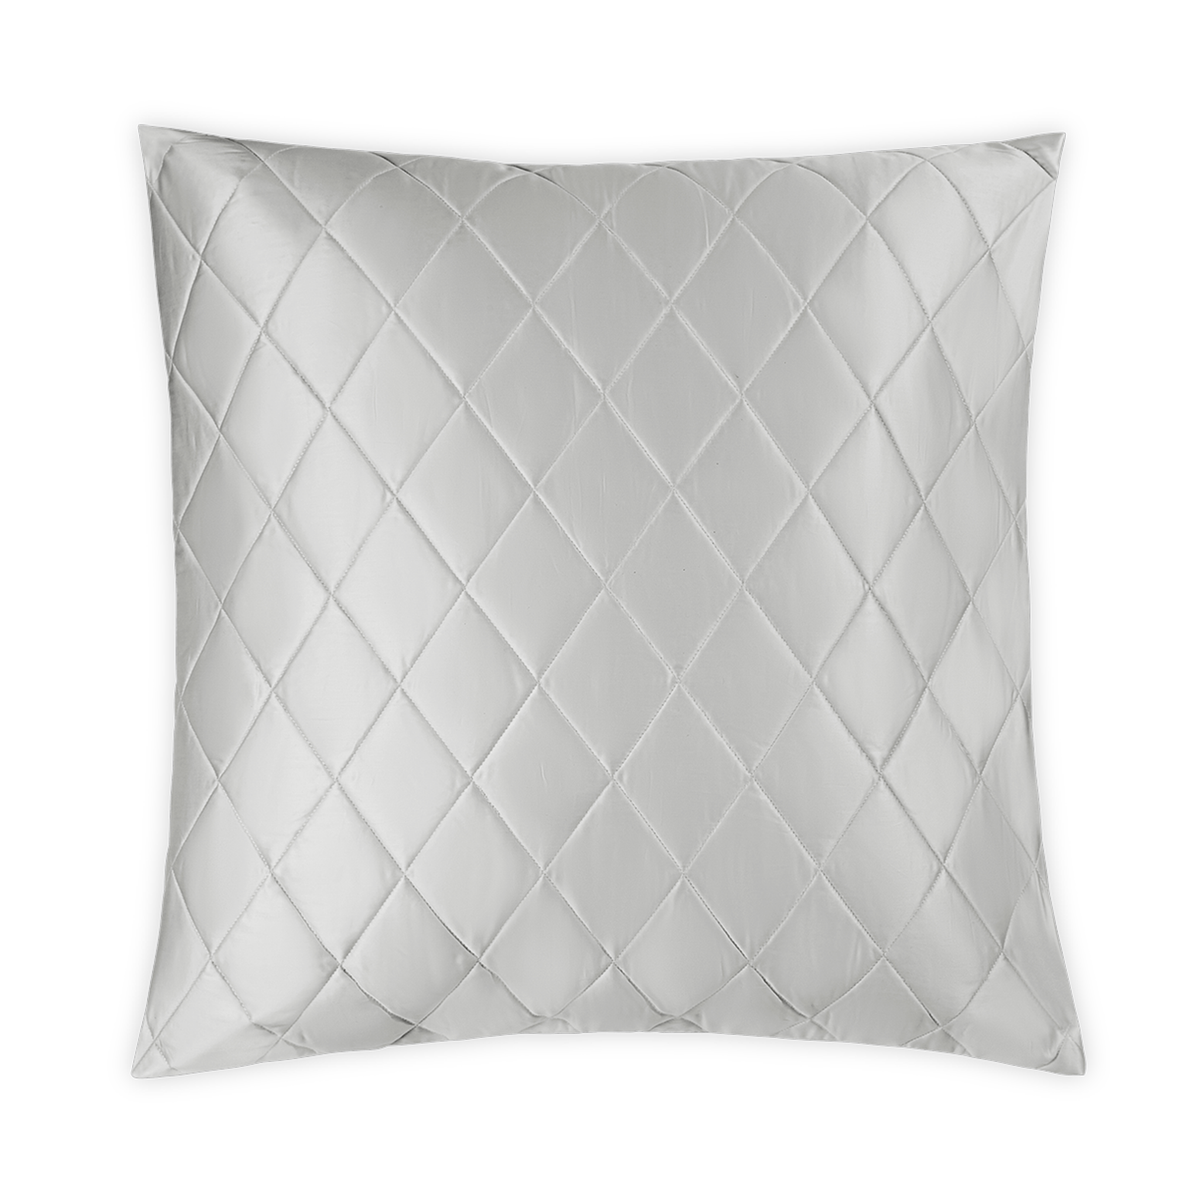 Silo Image of Matouk Nocturne Quilted Bedding Euro Sham in Silver